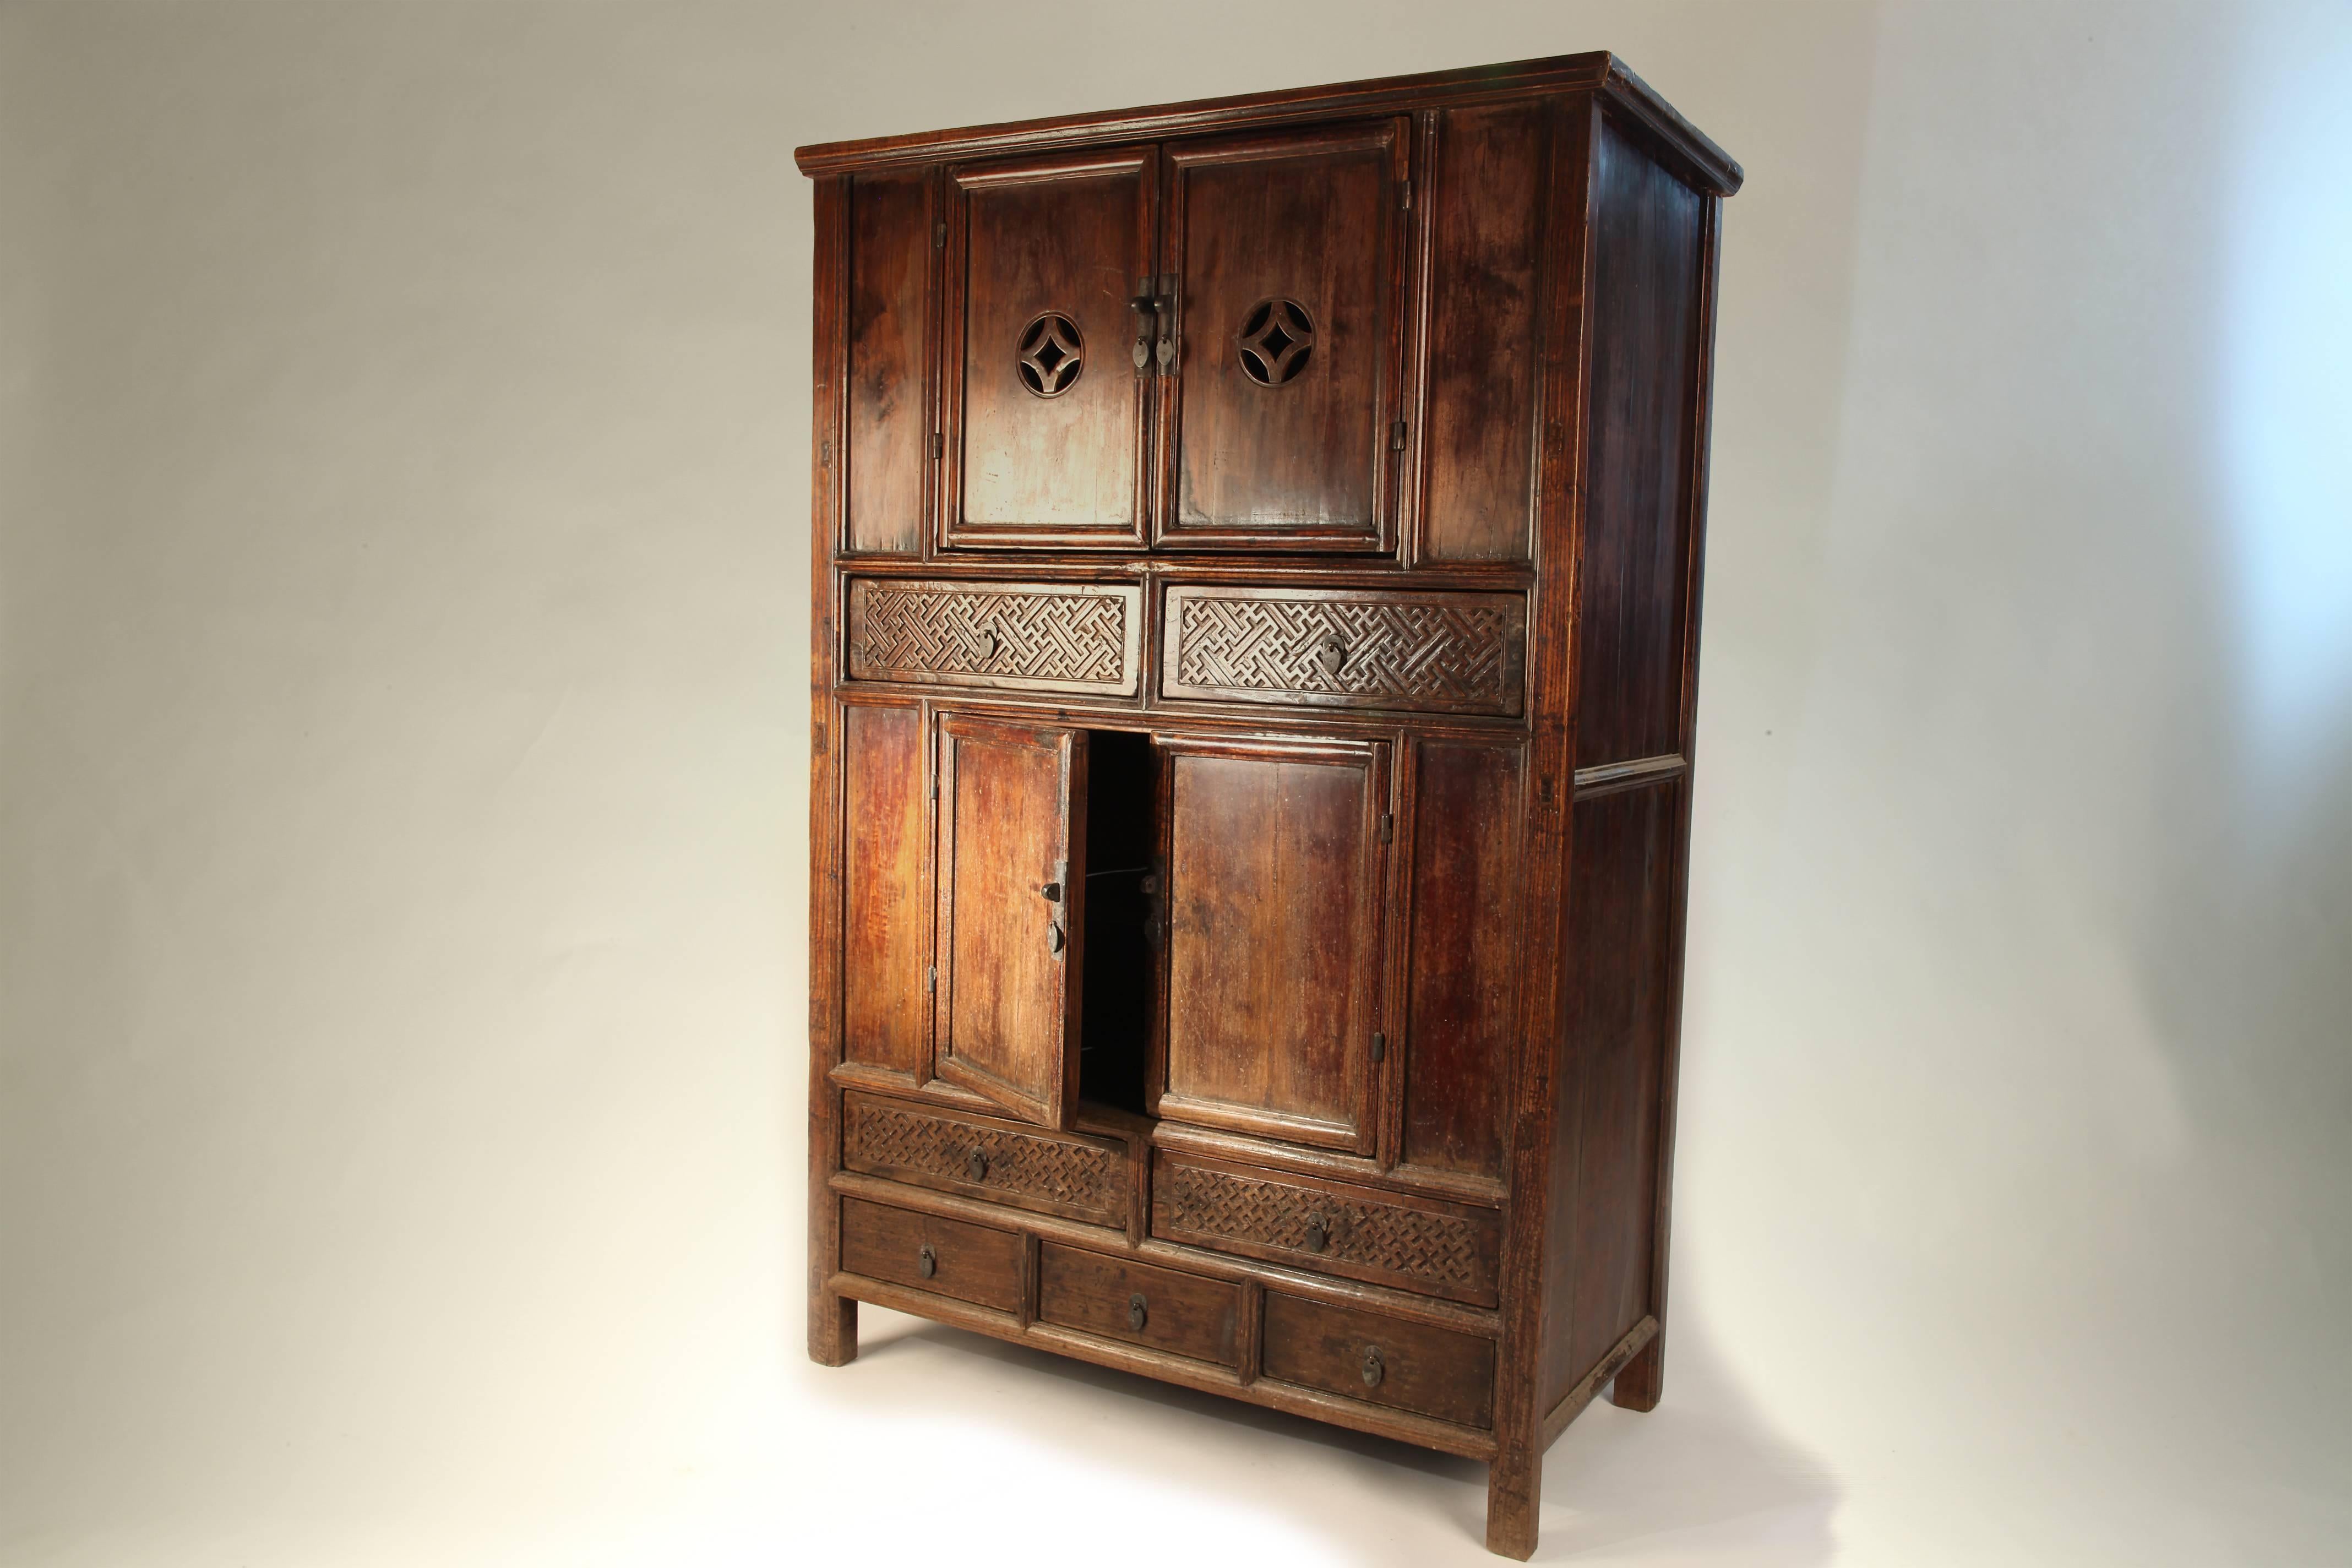 This handsome wardrobe features two storage compartments, each housing a single removable shelf covered by a pair of doors of which the top set has pierced-carved medallion-and-diamond decoration. Additional storage comes in the form of seven